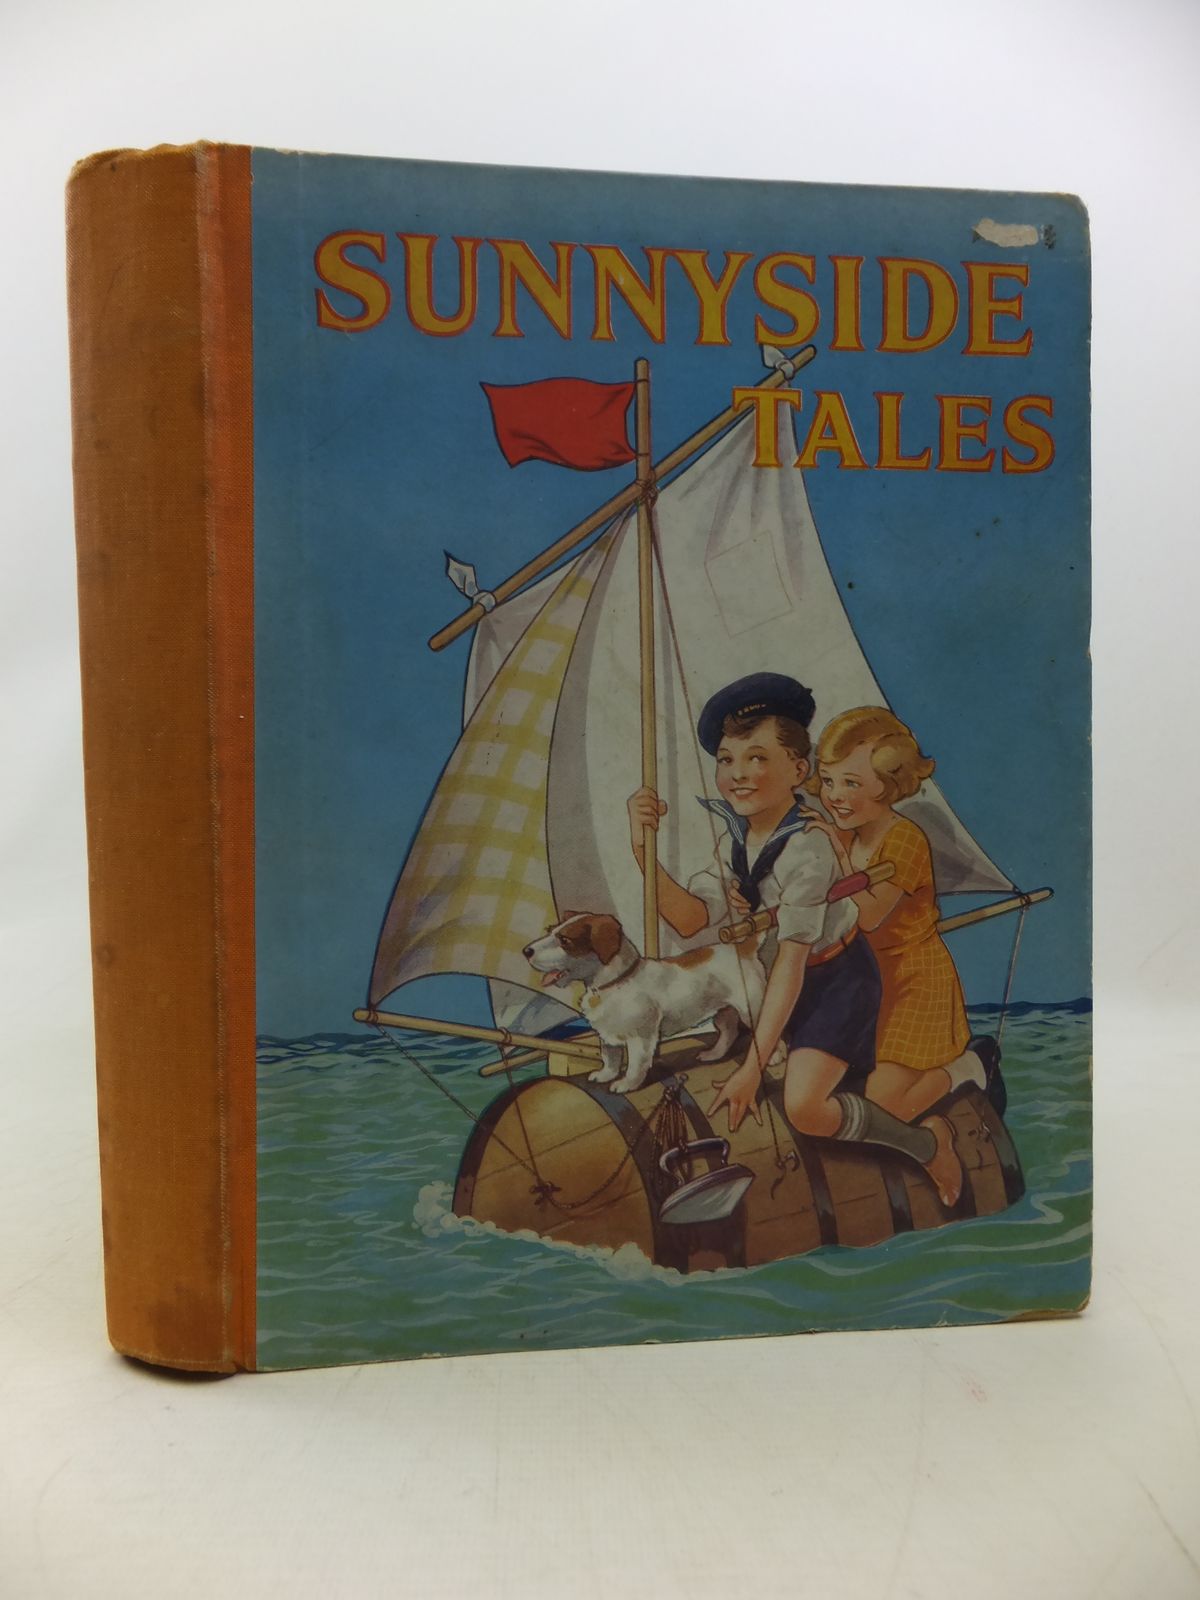 Photo of SUNNYSIDE TALES published by Juvenile Productions Ltd. (STOCK CODE: 1808926)  for sale by Stella & Rose's Books